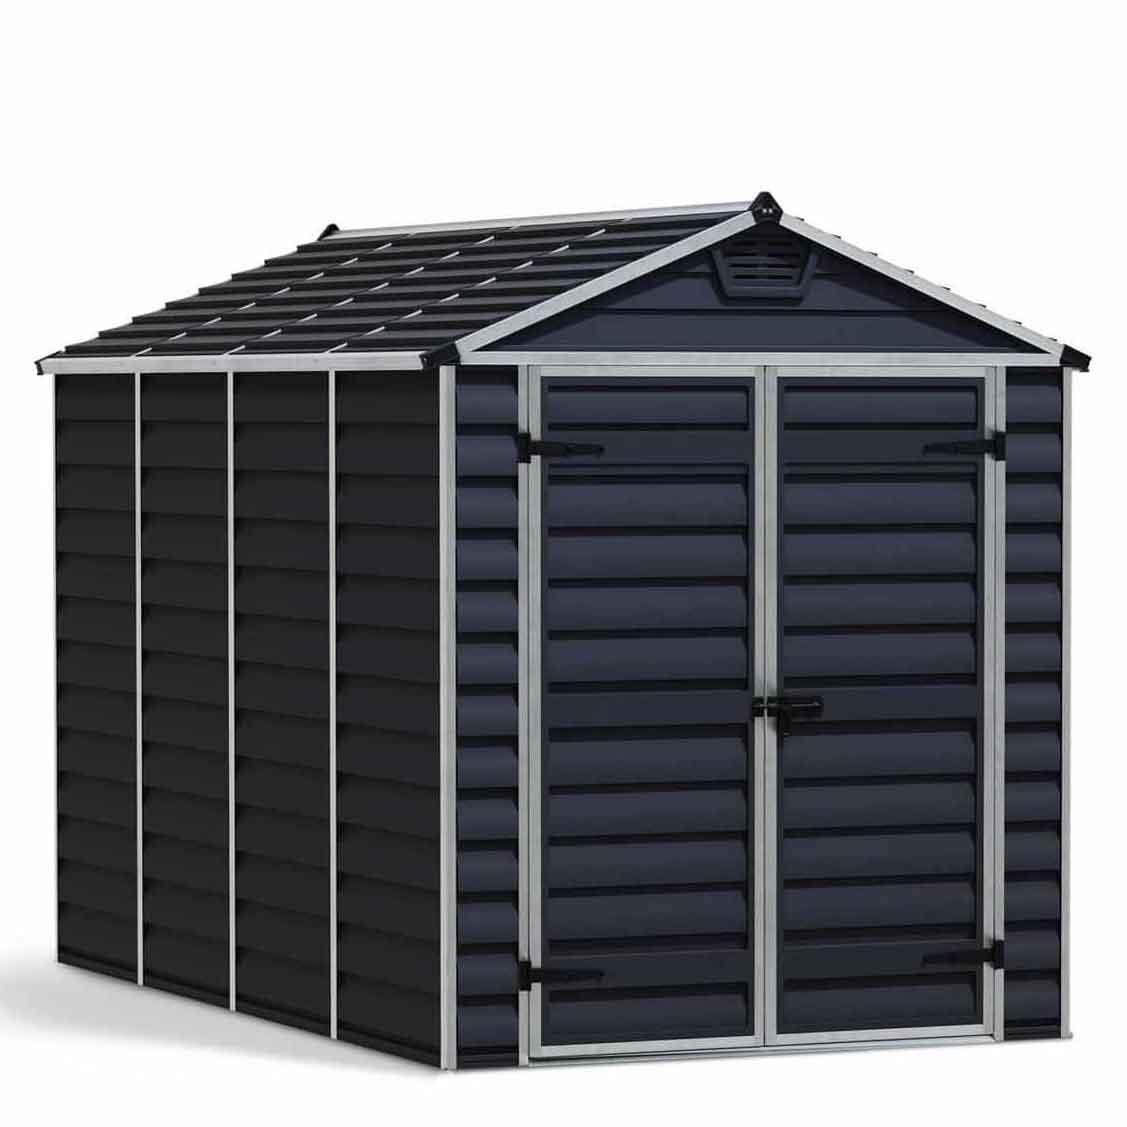 6x10 plastic shed in dark grey with double doors